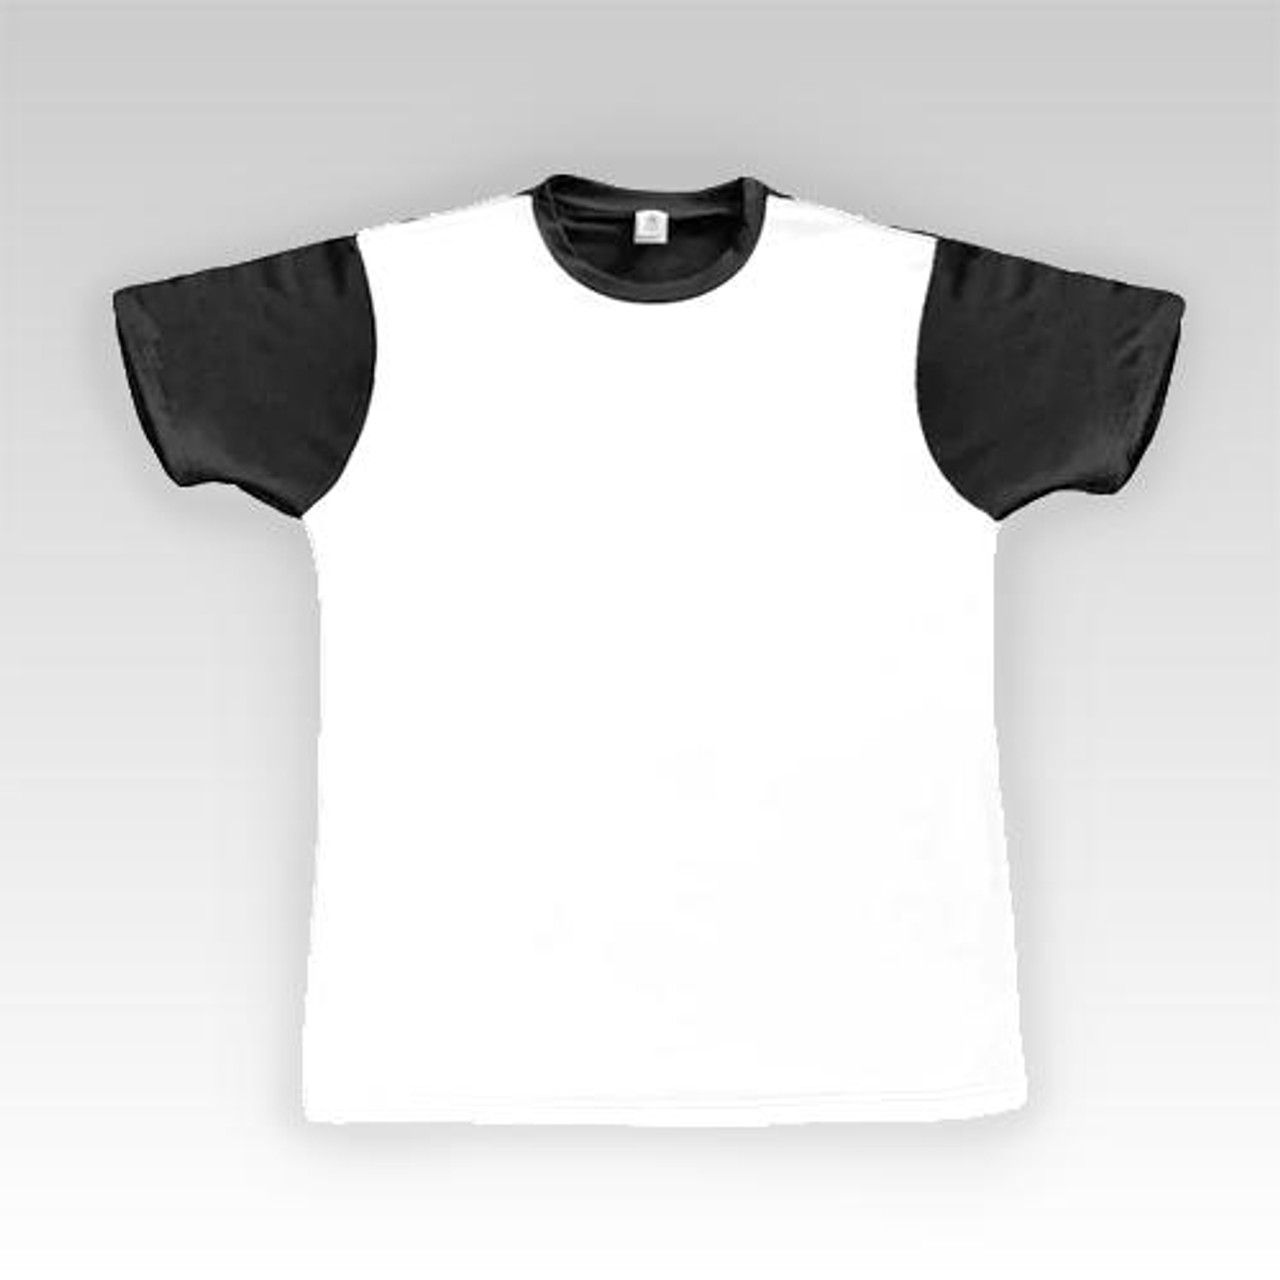 Sublimation Blank Black and White T-Shirt by Silky Socks